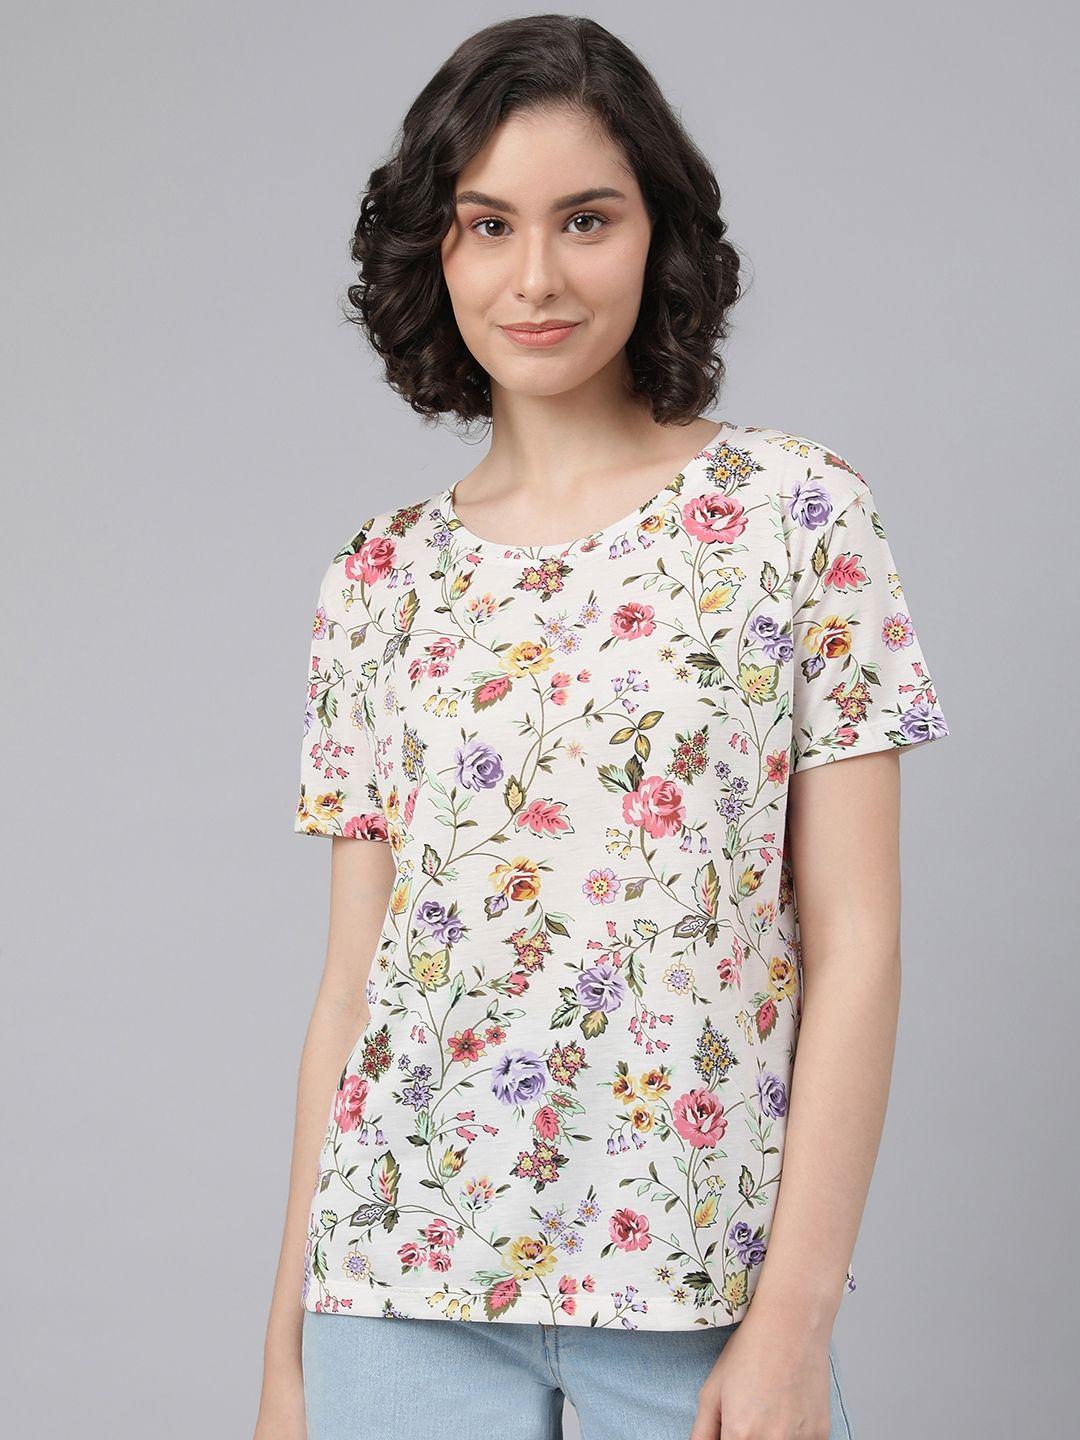 marks & spencer women off white & pink floral printed t-shirt